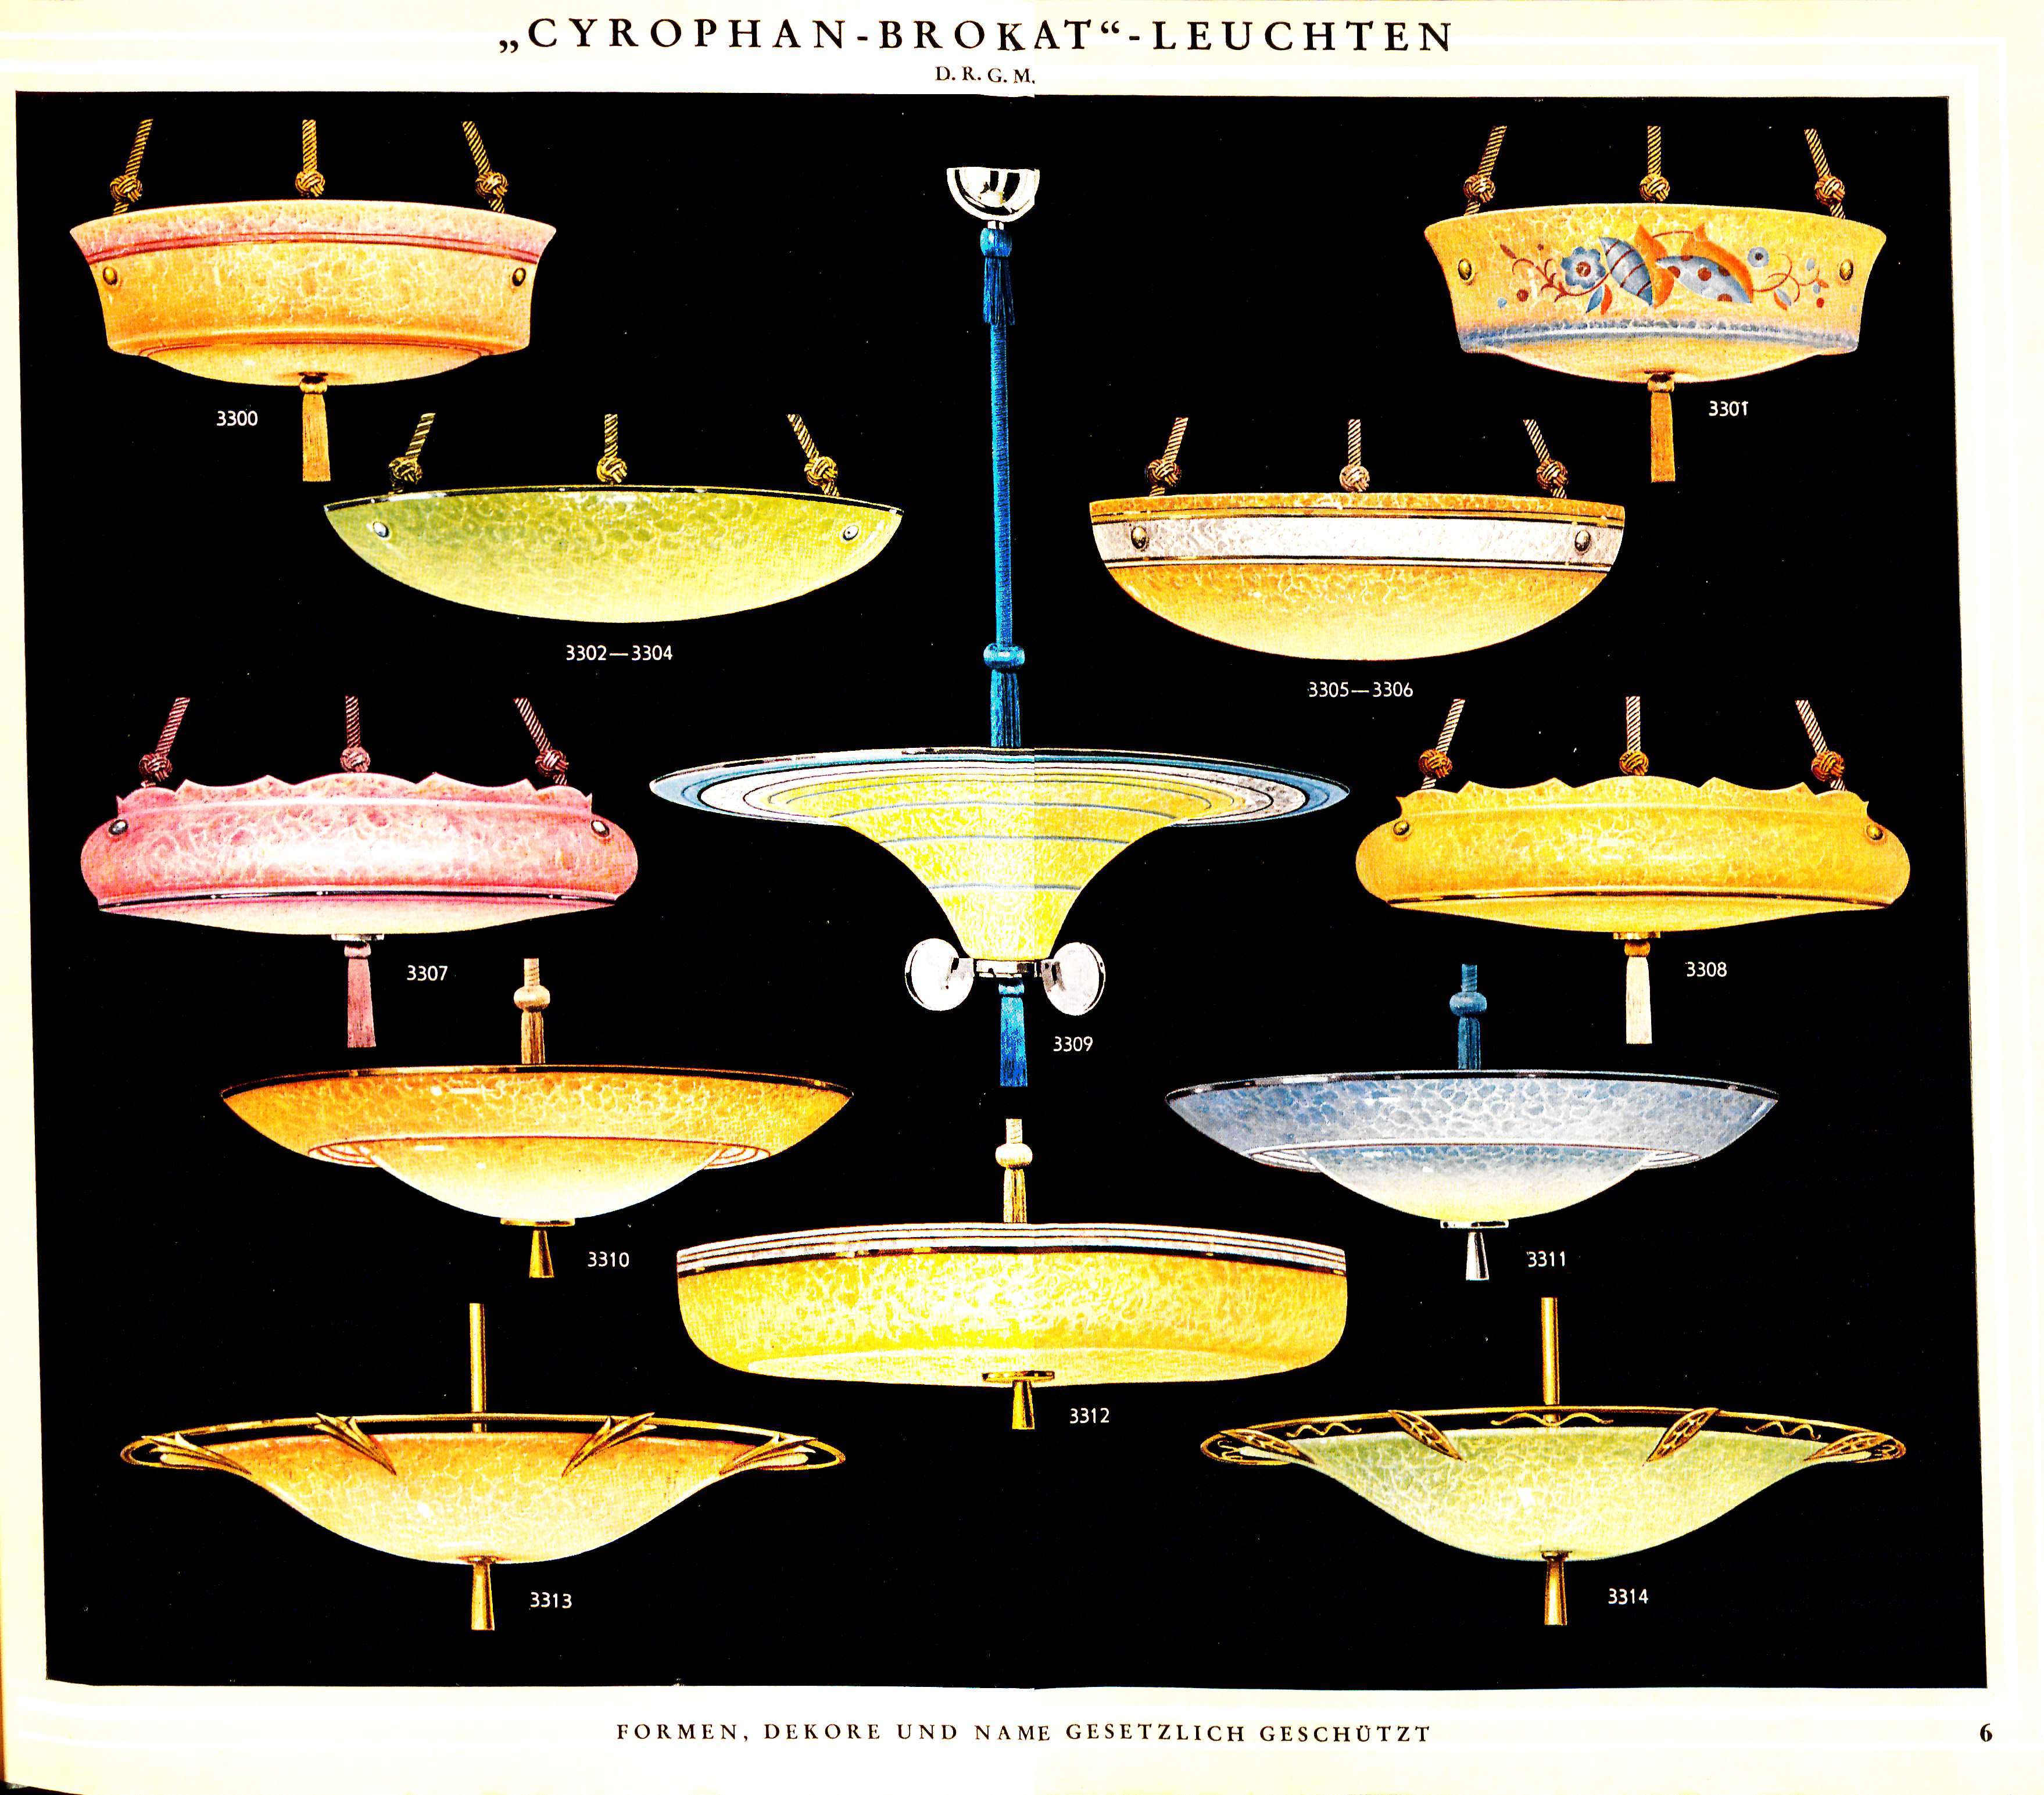 Image features a lighting catalogue page showing hanging lamps with large glass shades in various shapes and colors, all on a black background. Please scroll down to read the blog post about this object.